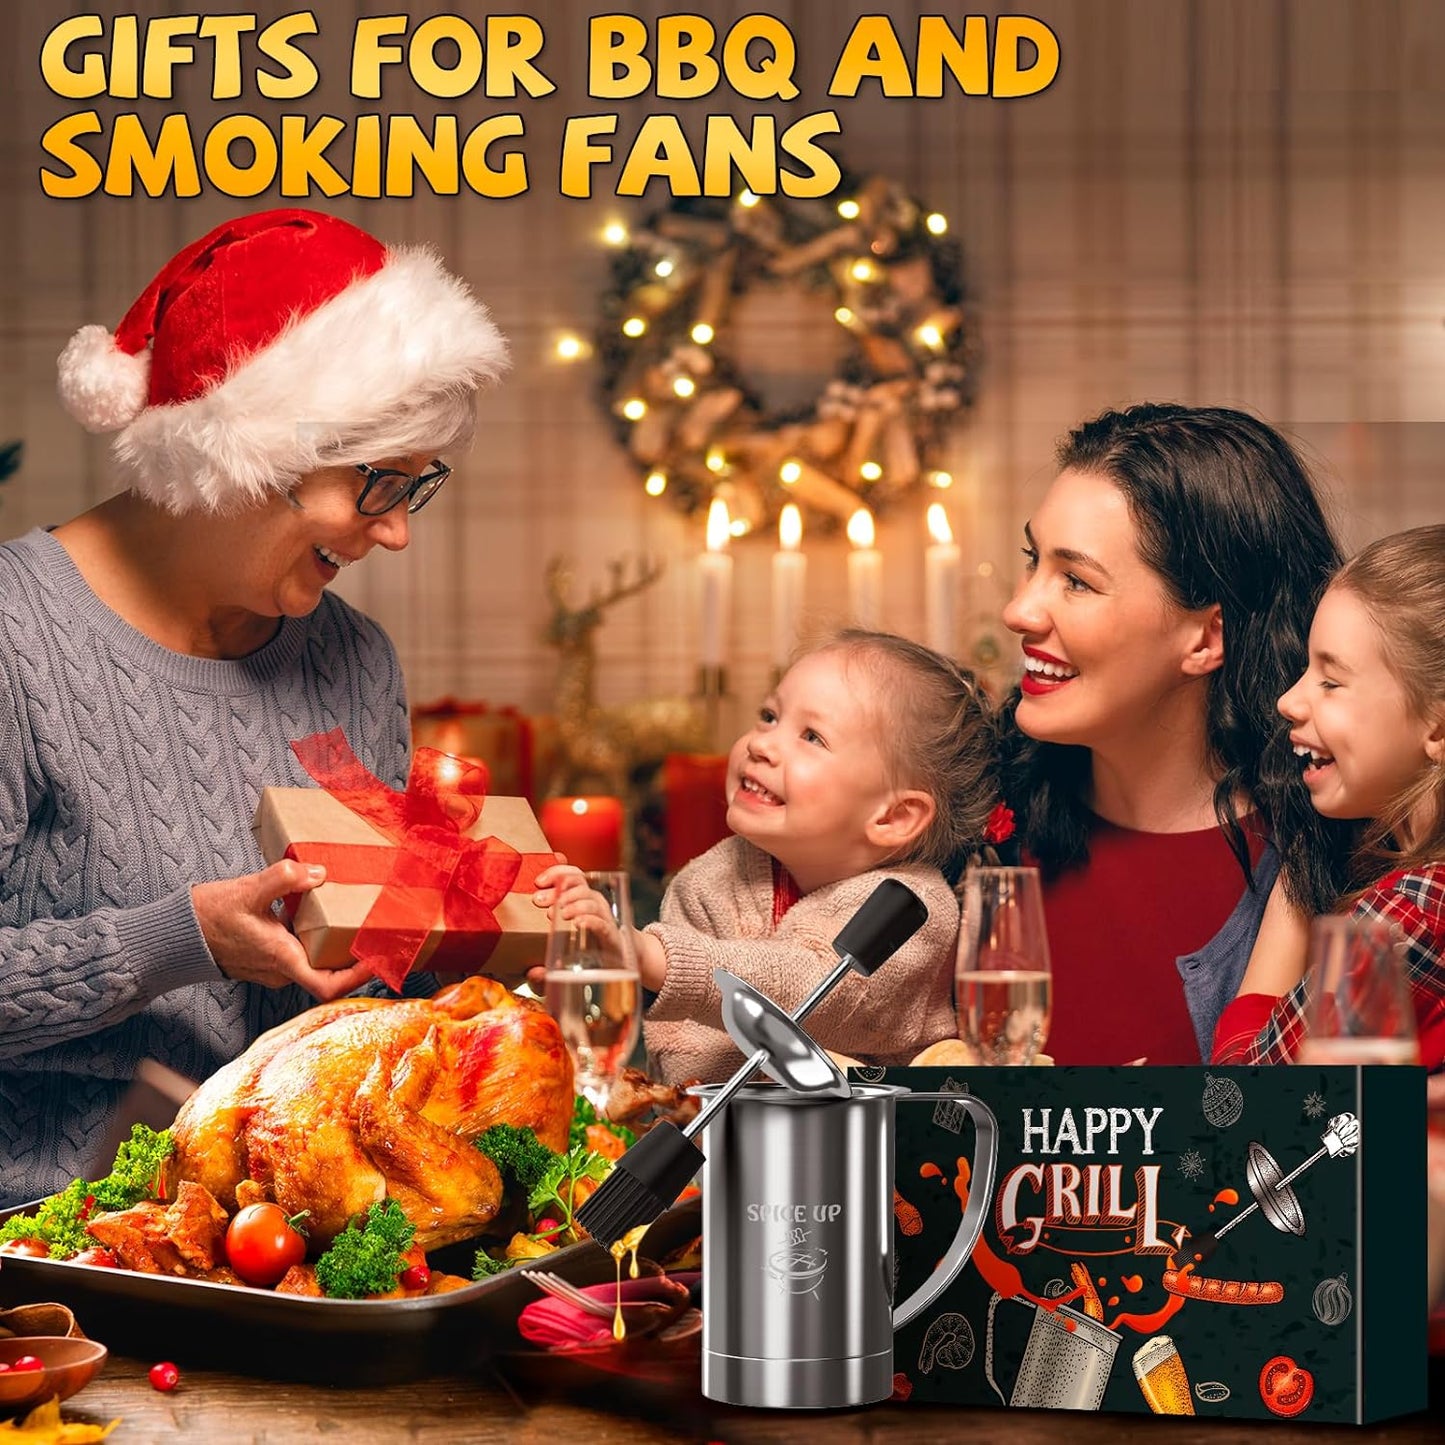 Grilling Accessories Men Women Gifts - BBQ Baster Brush and Sauce Basting Pot Set Christmas Stocking Stuffers Dad Mom Him Grandparents Chef Tools Smoker Unique Cooking Gadgets Kitchen Essentials